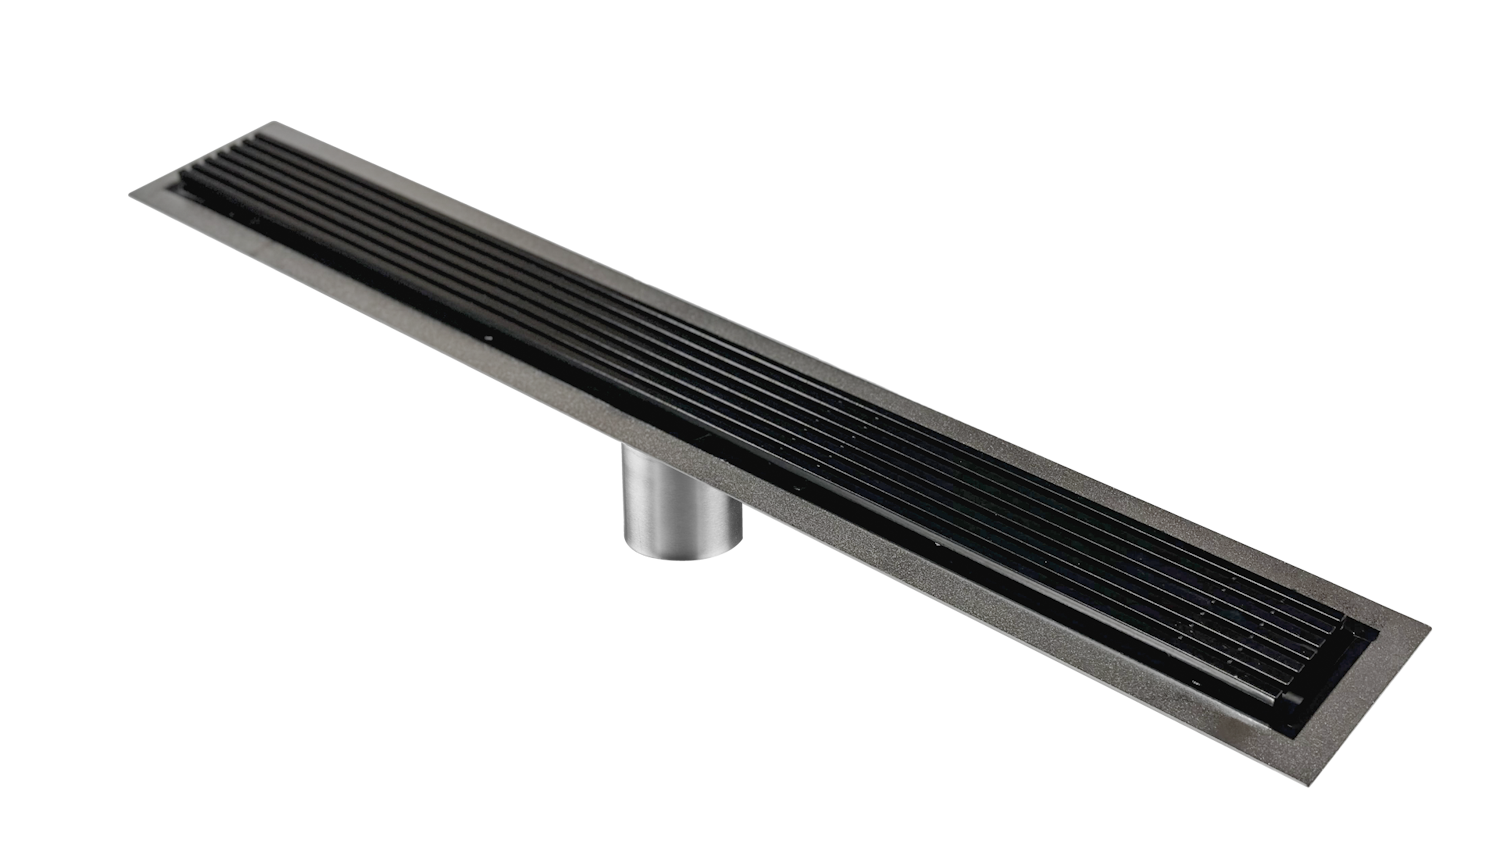 33 Inch Black Linear Shower Drain Wedge Wire Design, Drains Unlimited